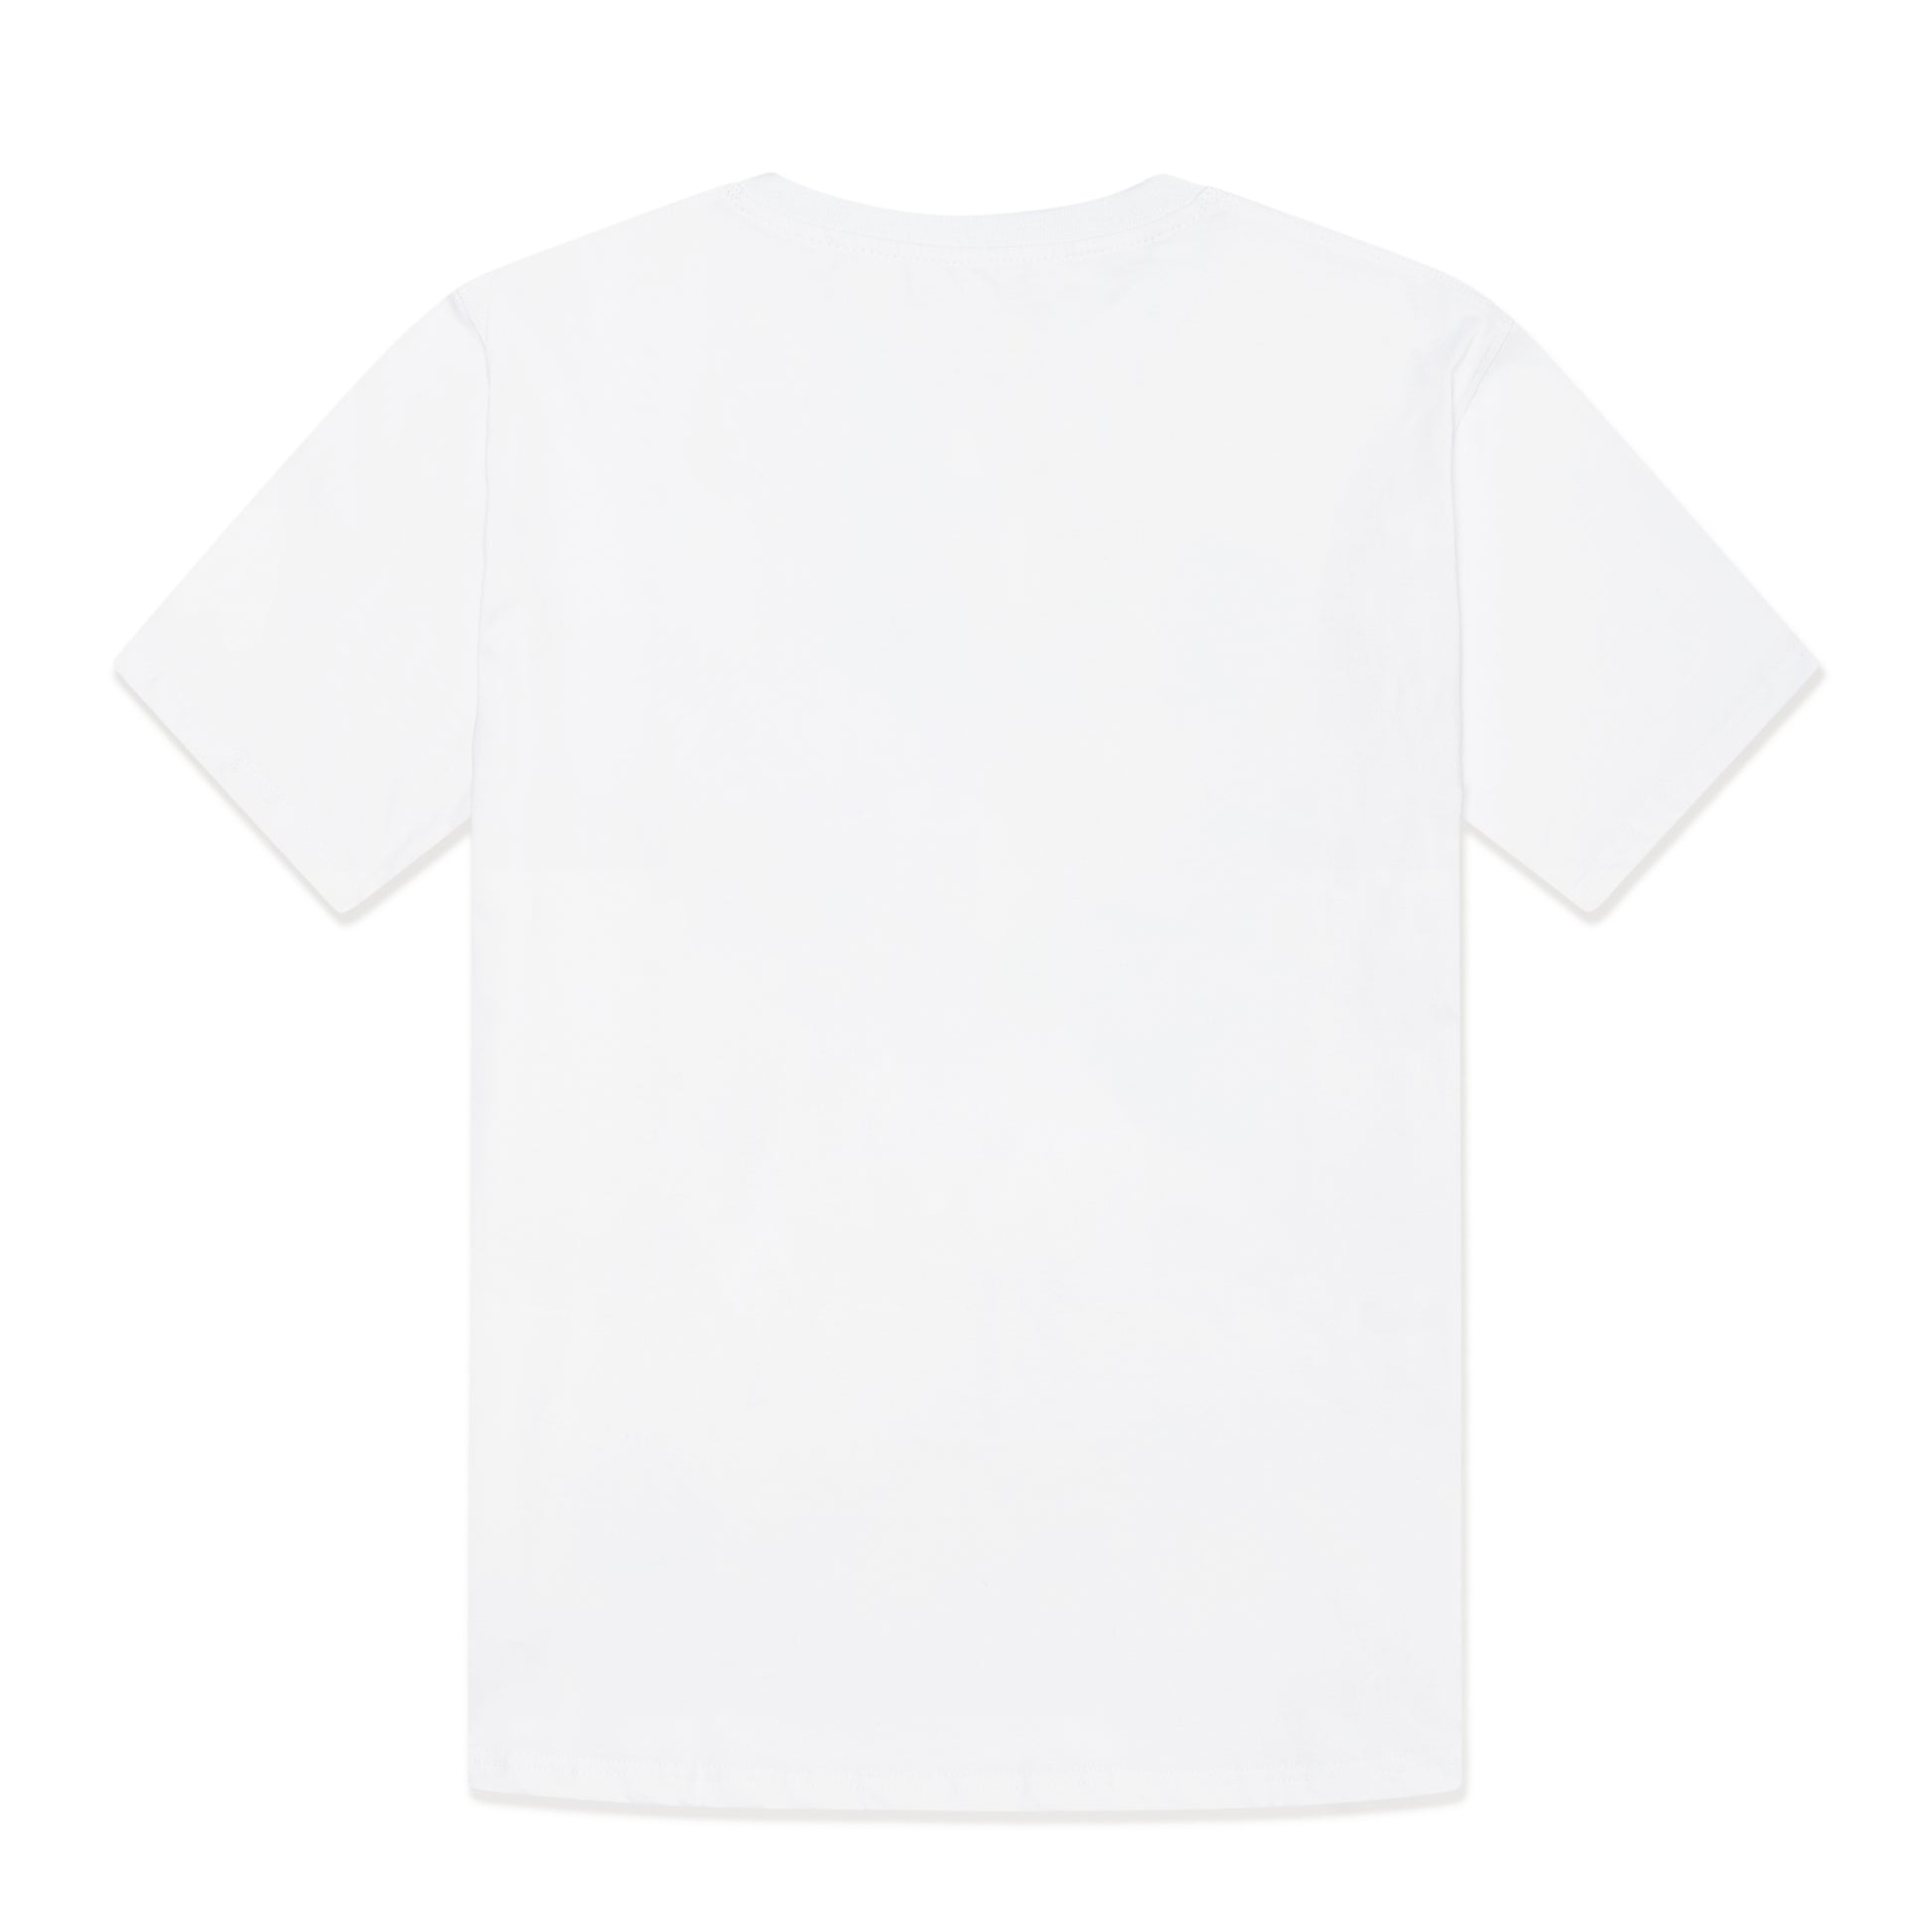 The-World-Is-Yours-Tee-in-white